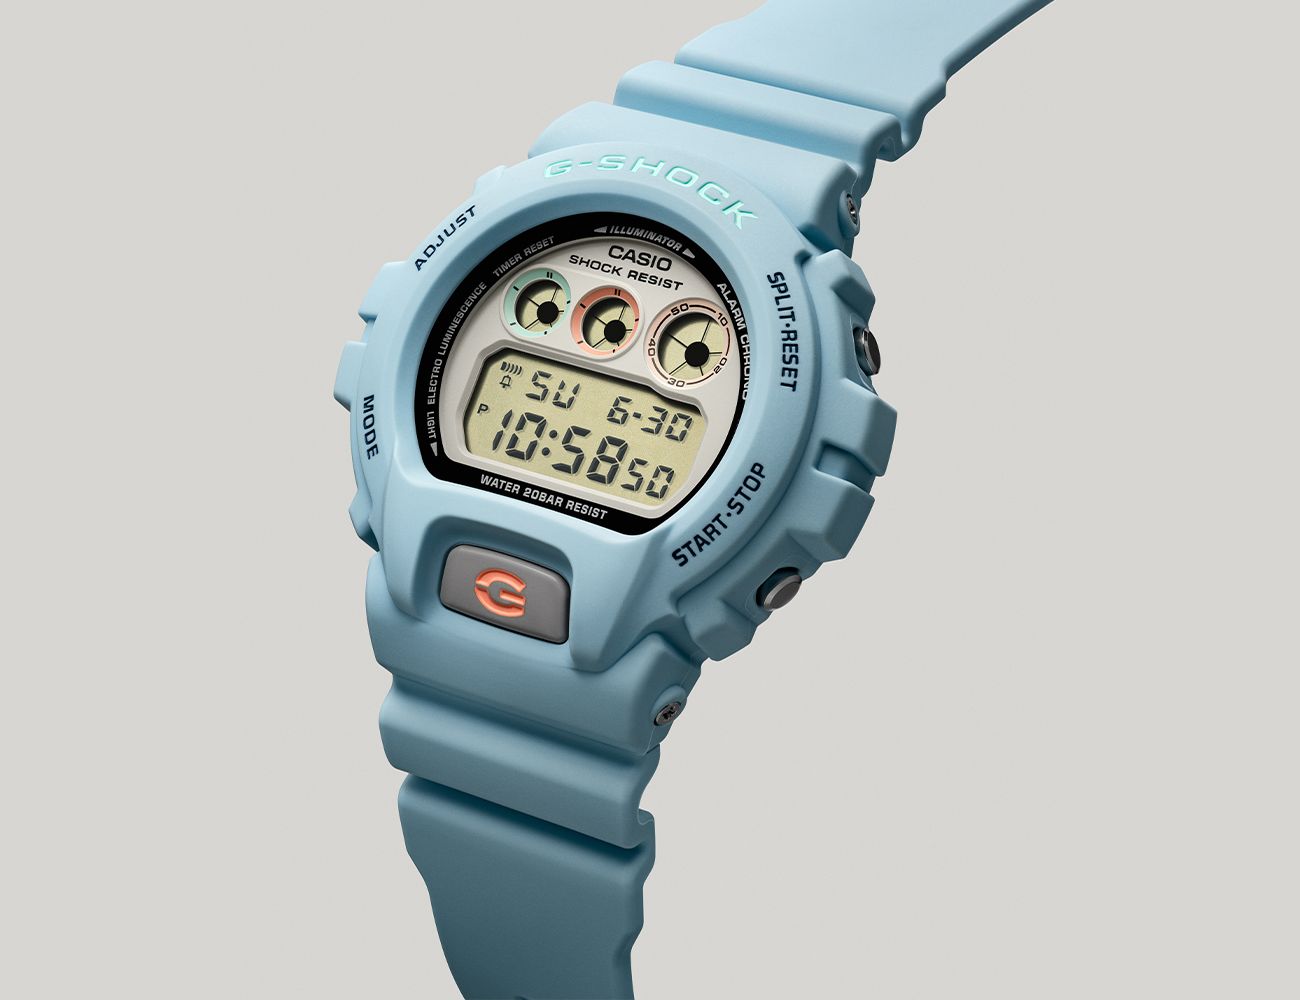 John Mayer and Hodinkee Have Created a Special G-Shock Watch